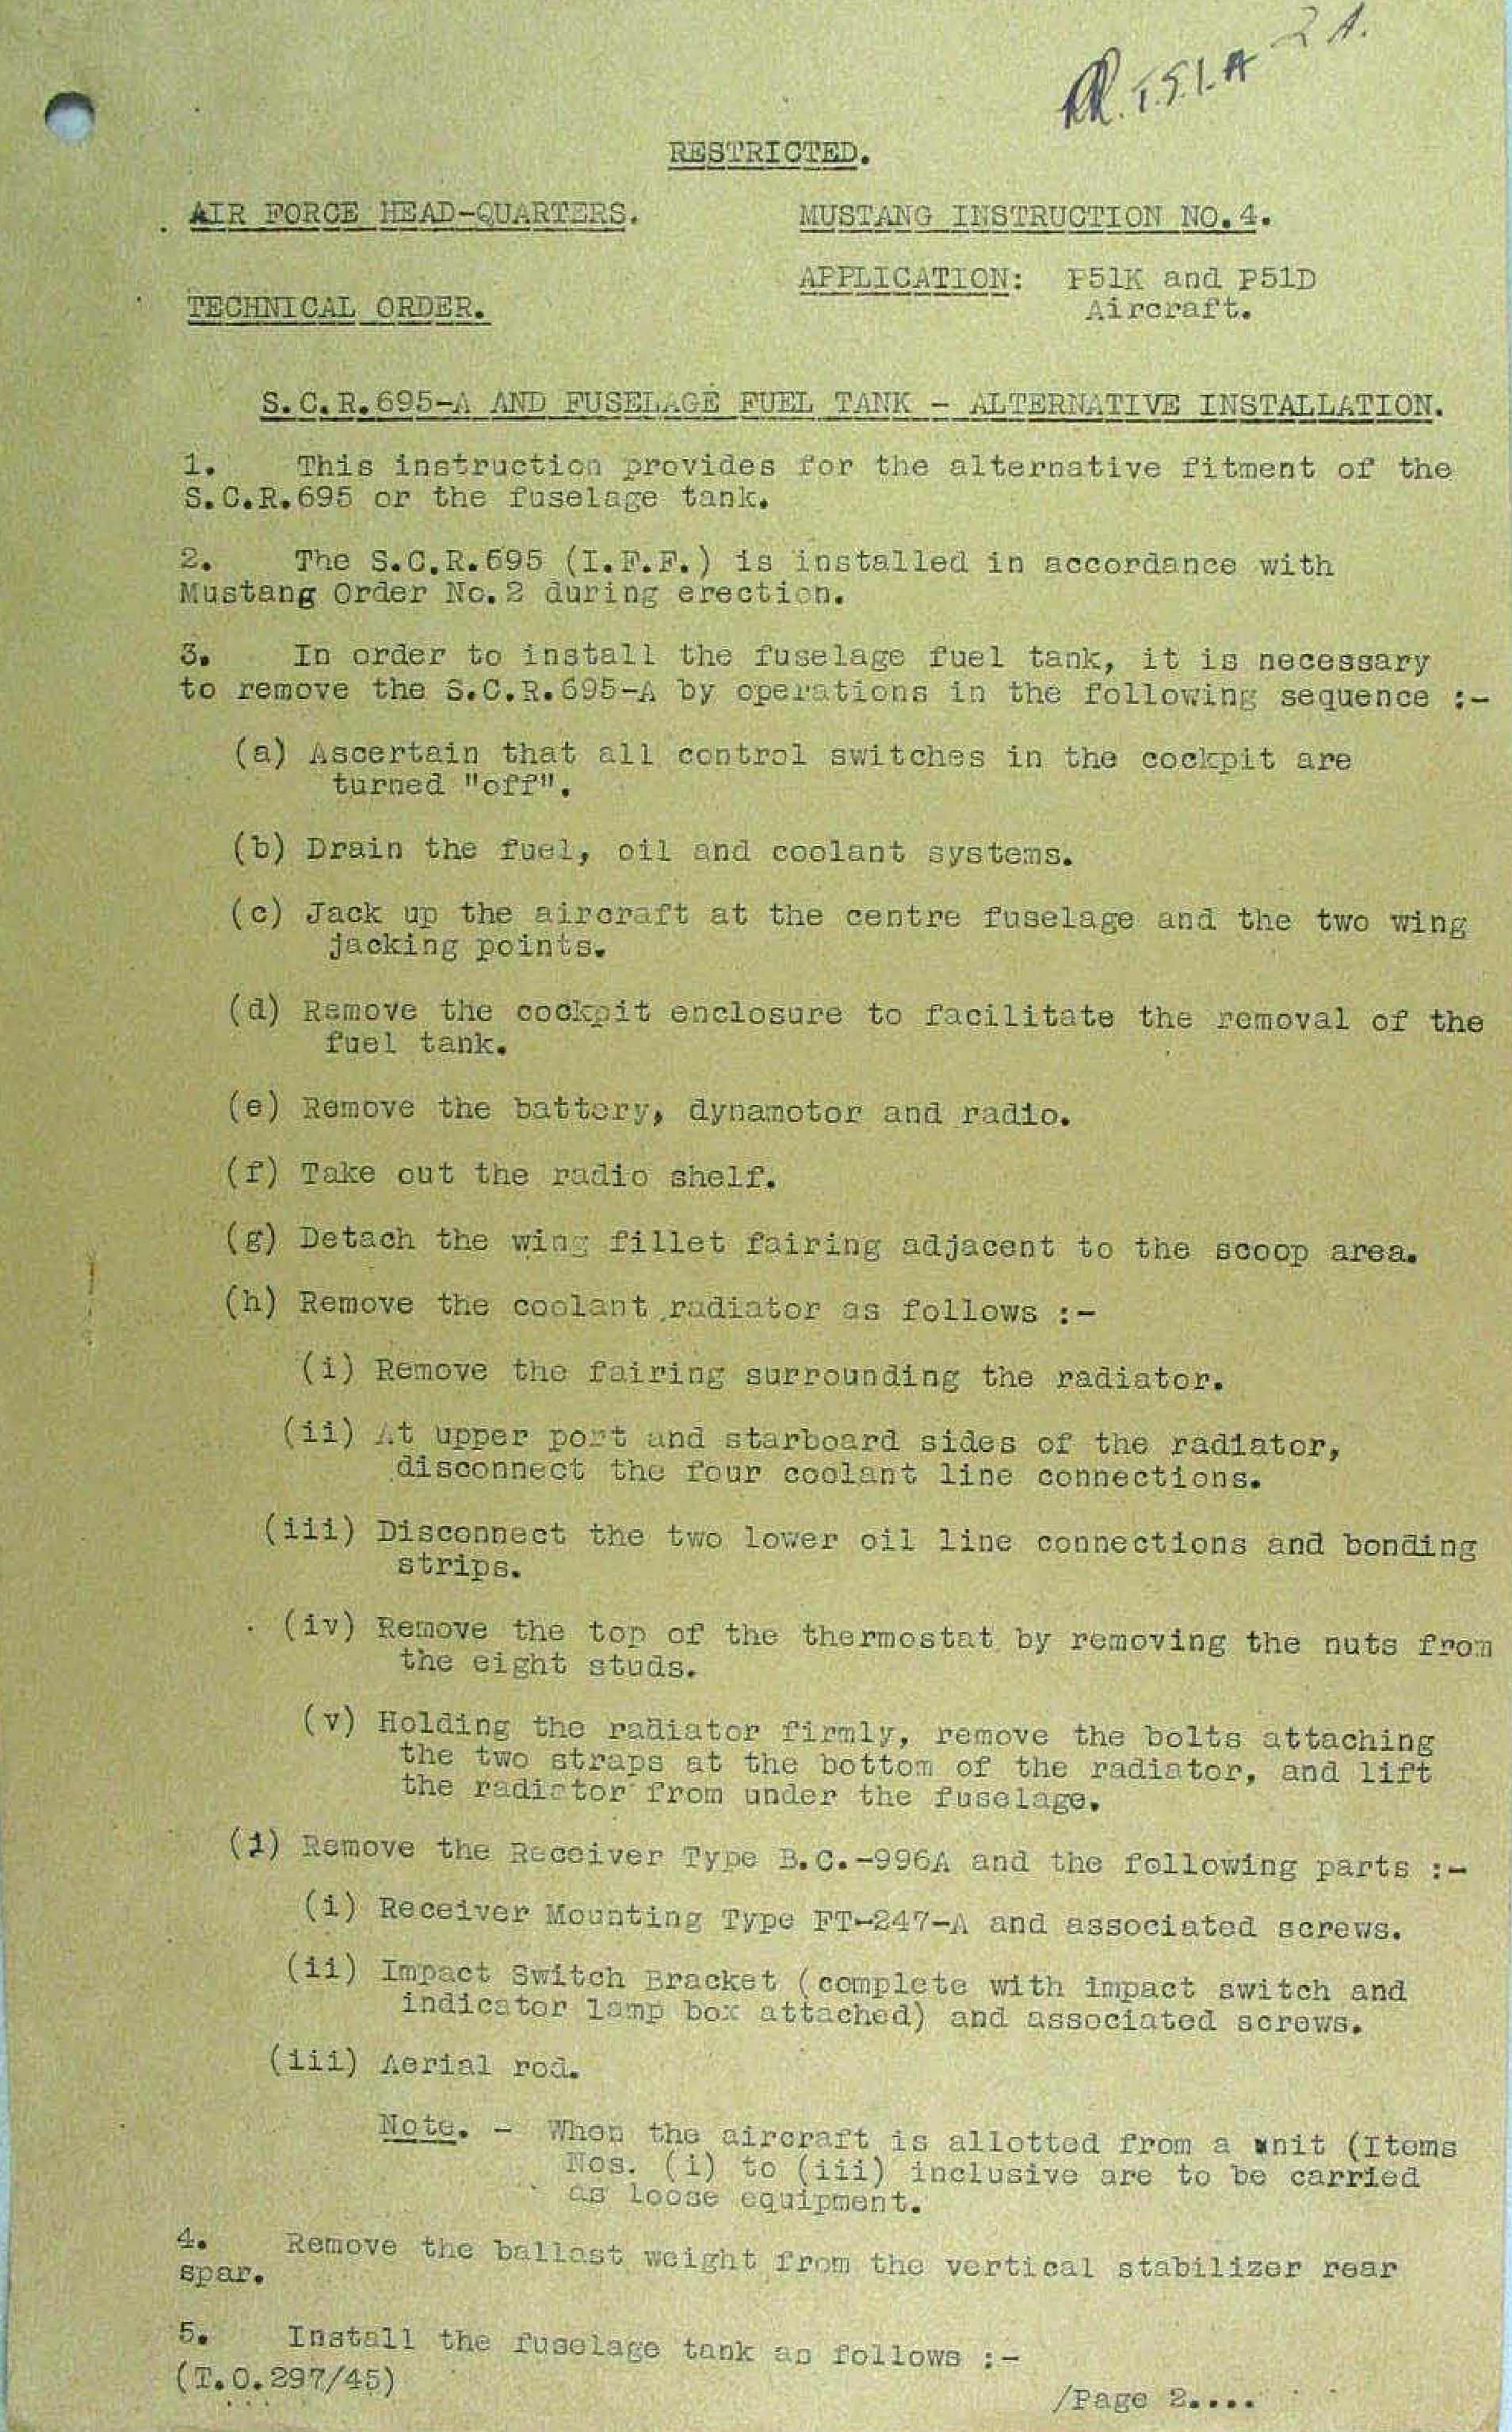 Sample page 1 from AirCorps Library document: Alternative Installation for SCR 695-A and Fuselage Tank